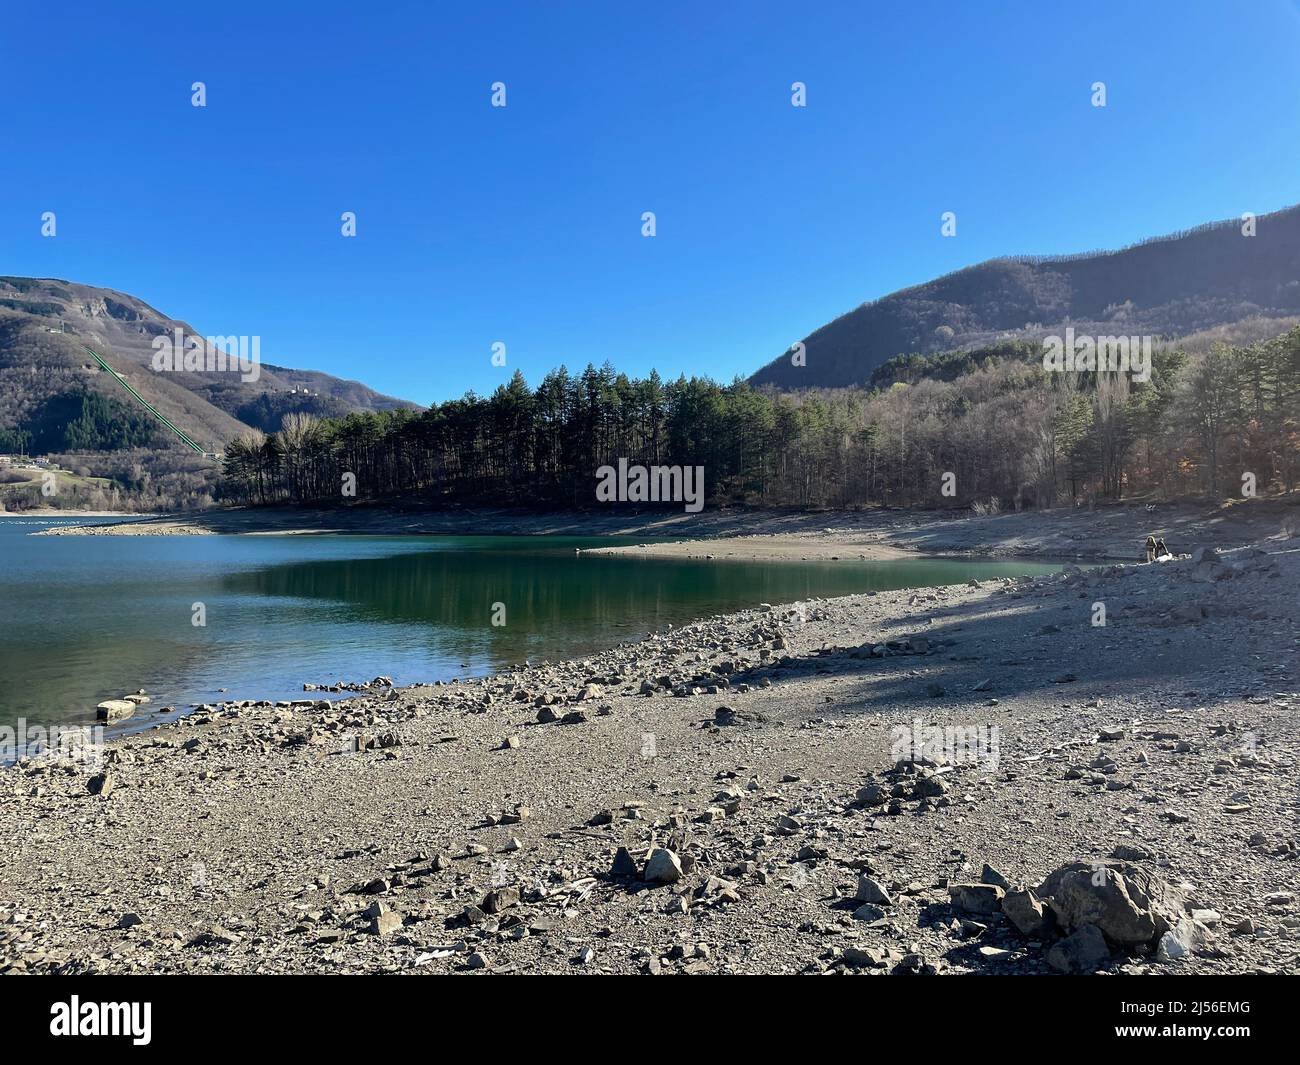 Lago di Suviana, Province of Bologna (Emilia-Romagna), Italy. Artificial lake seen from the shore. Low water levels, much of the rock bed is exposed. Stock Photo